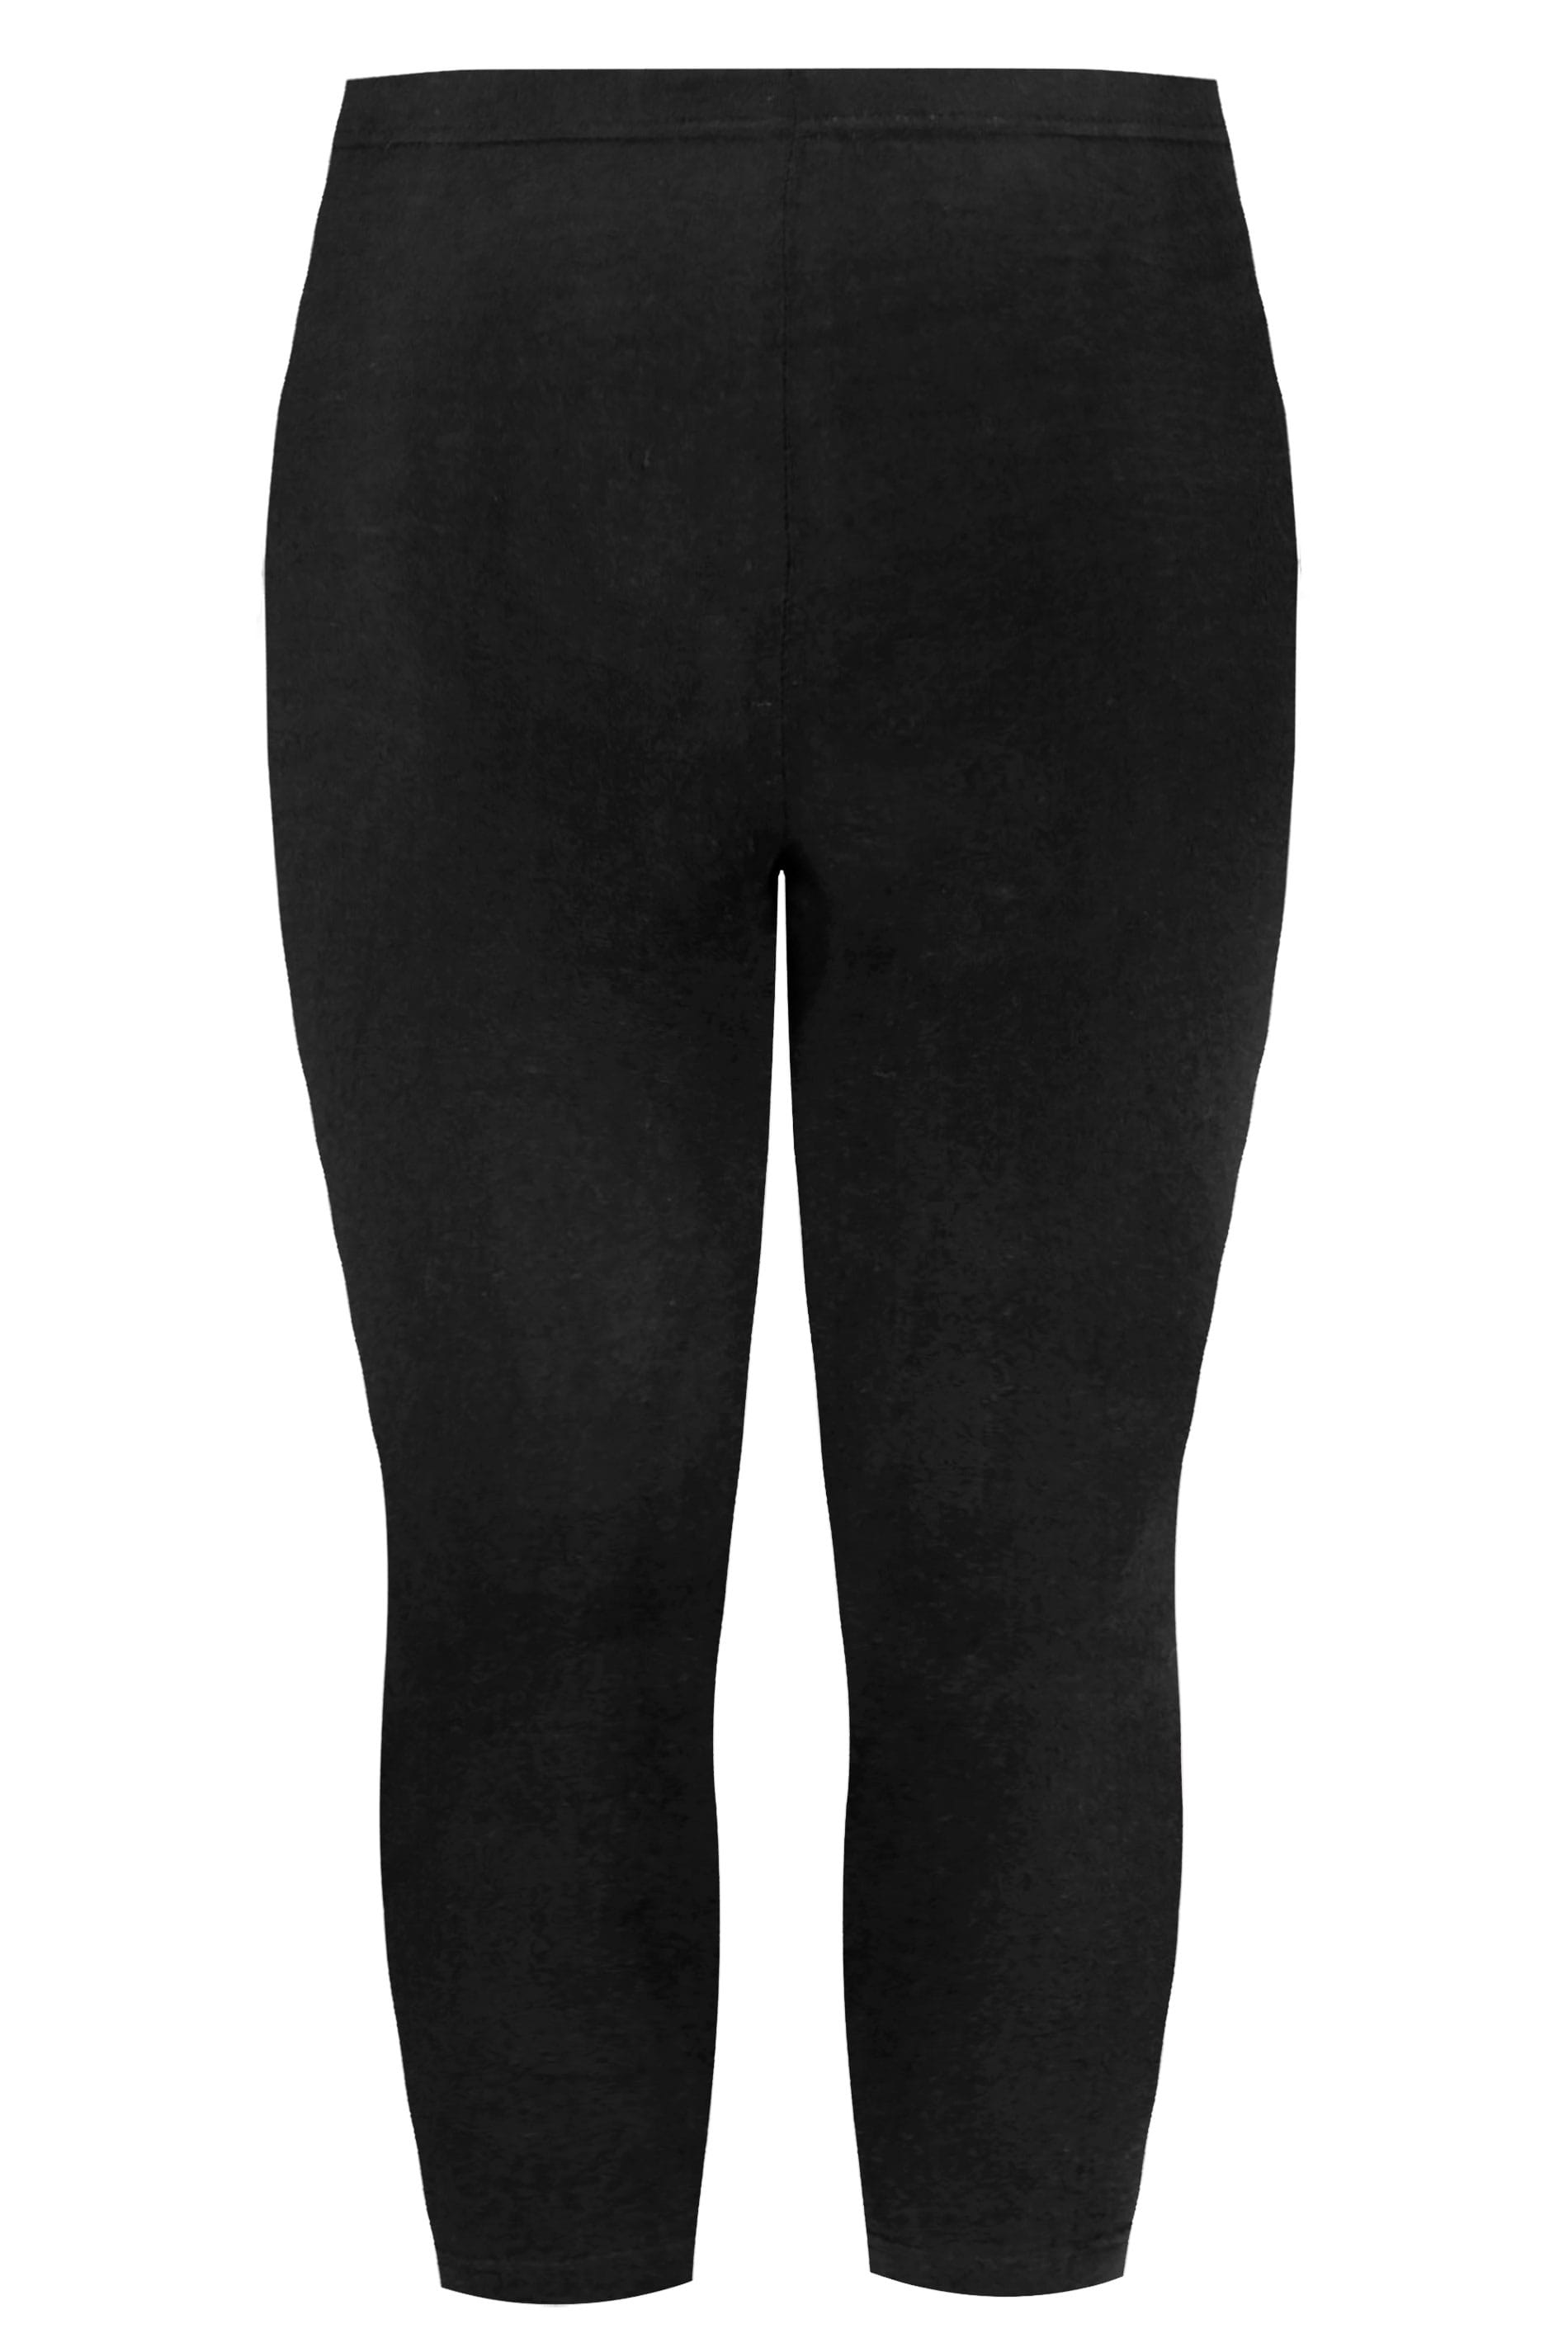 Women's Yours for Good Black Cotton Essential Cropped Leggings 